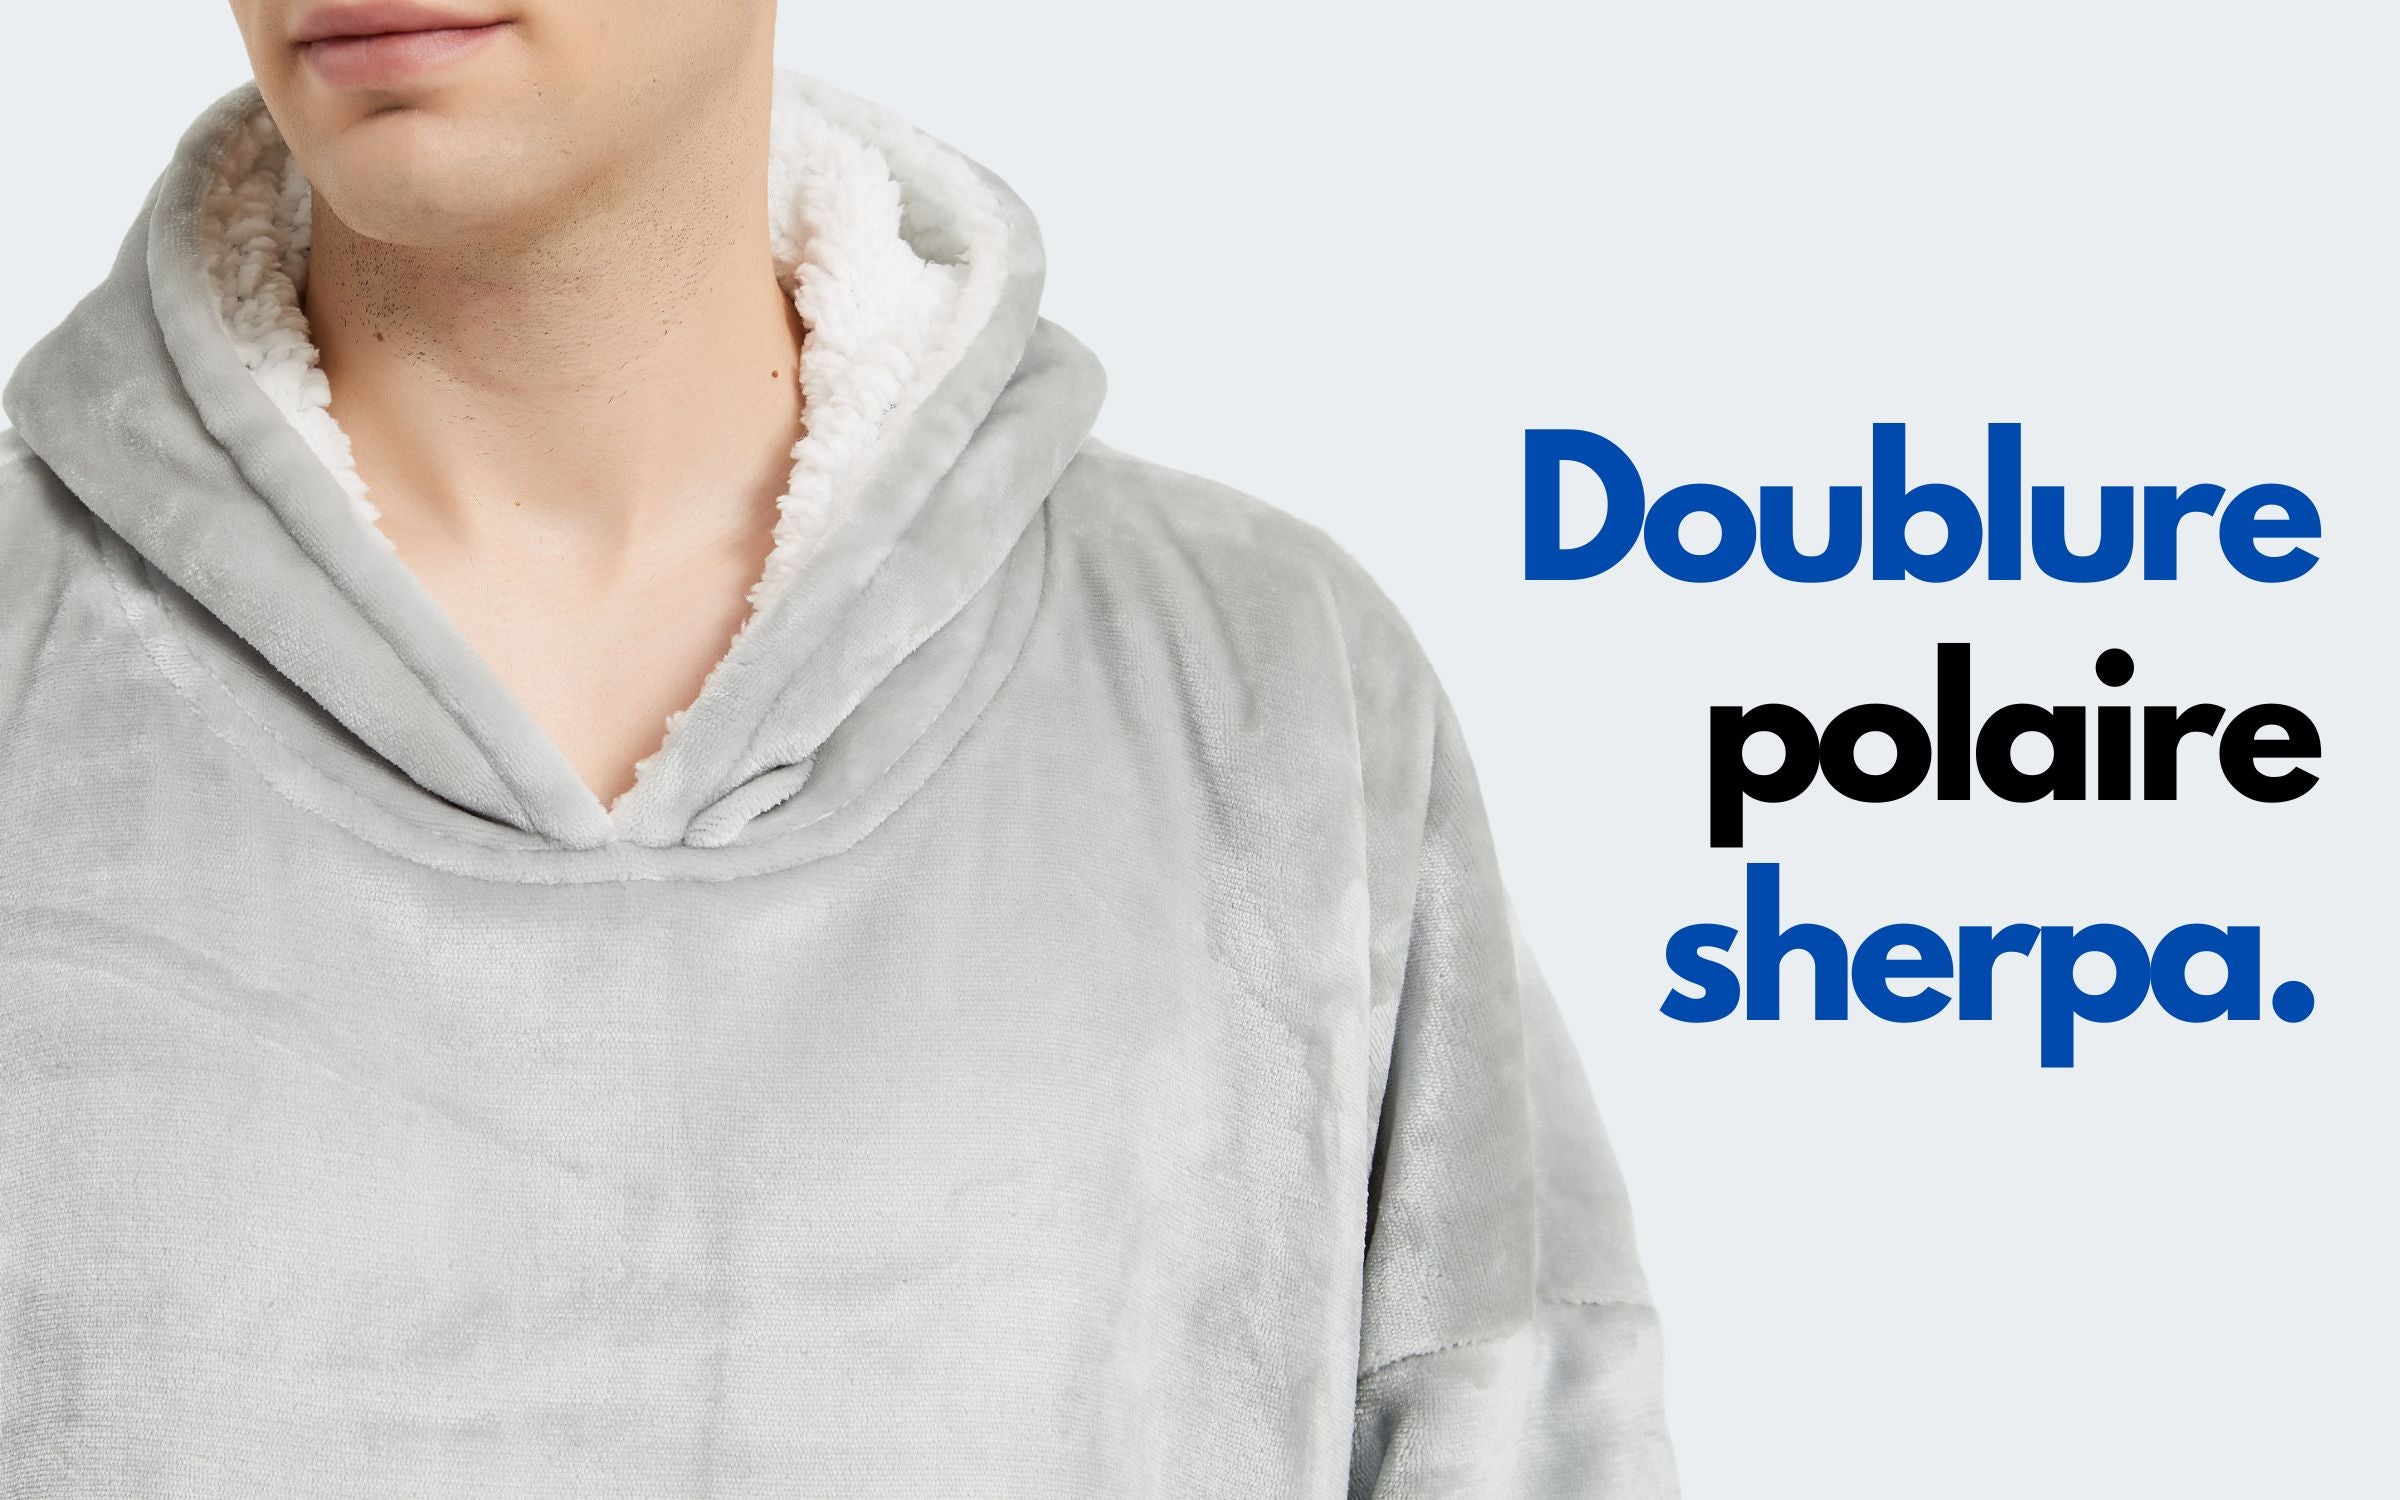 Doublure Polaire Sherpa chaude moelleuse cozy The Oversized Hoodie Homme Gris clair